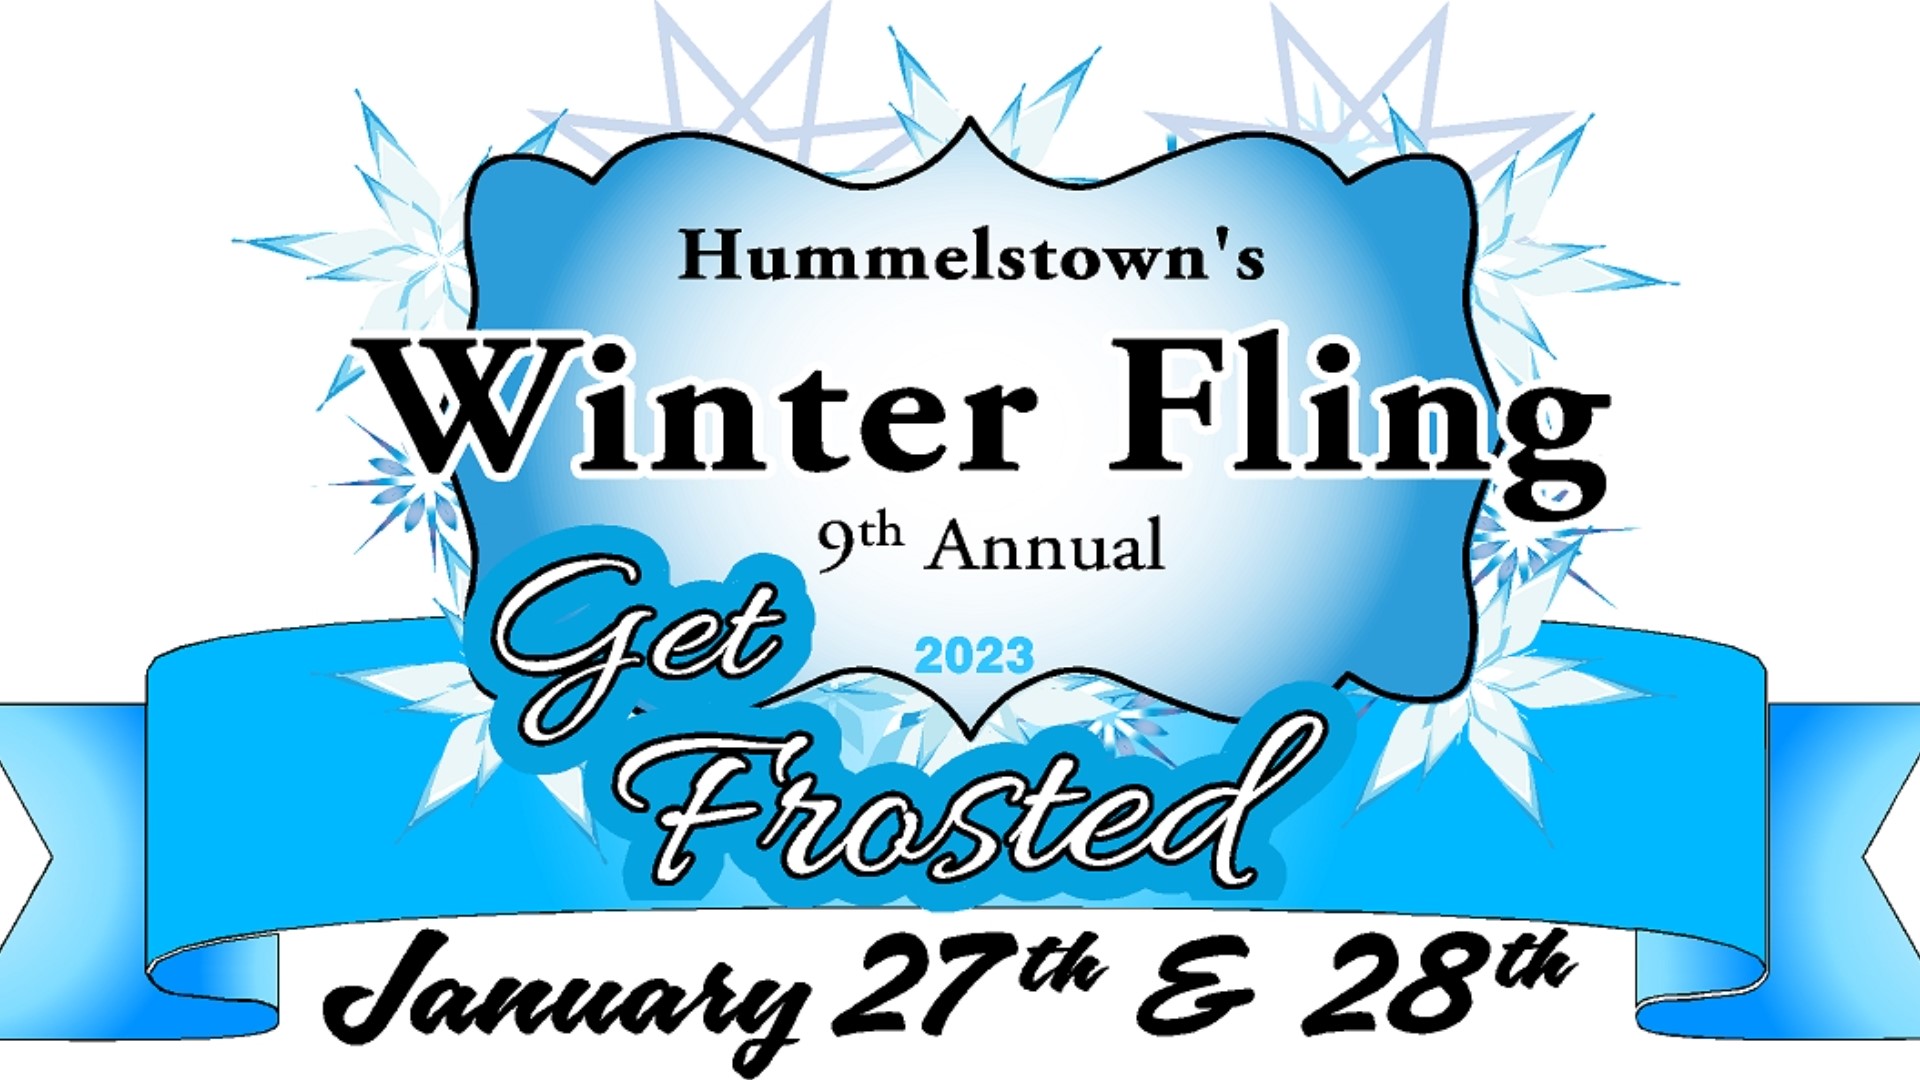 Those in Hummelstown can enjoy food trucks, live music and ice sculpture carving and more at the ninth annual Winter Fling, happening this Friday and Saturday.